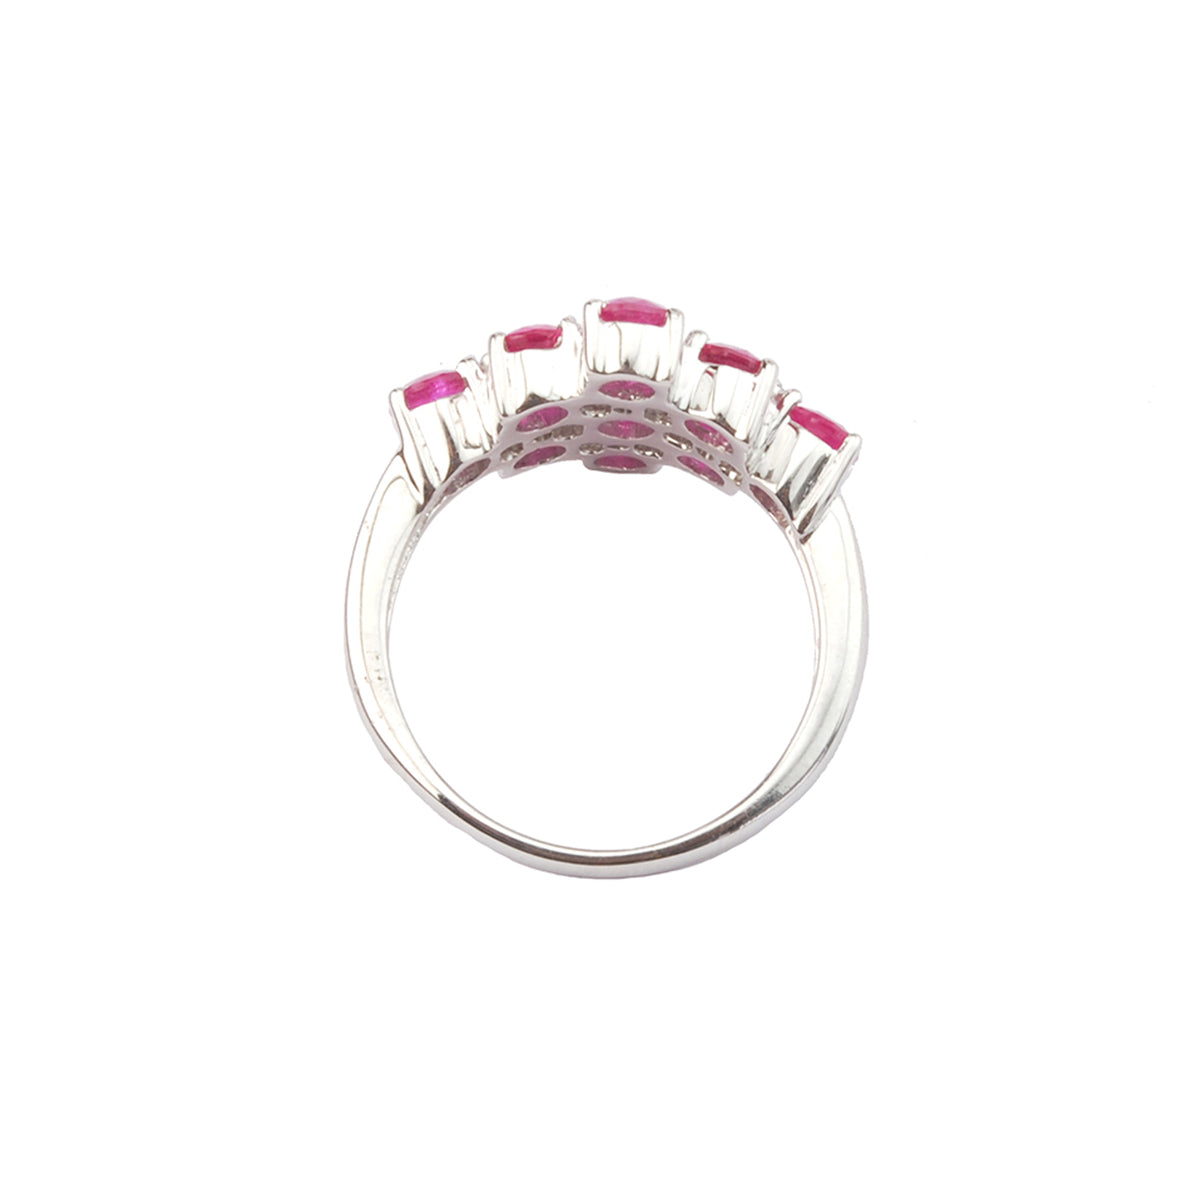 Oval rubies set in prongs in silver ring